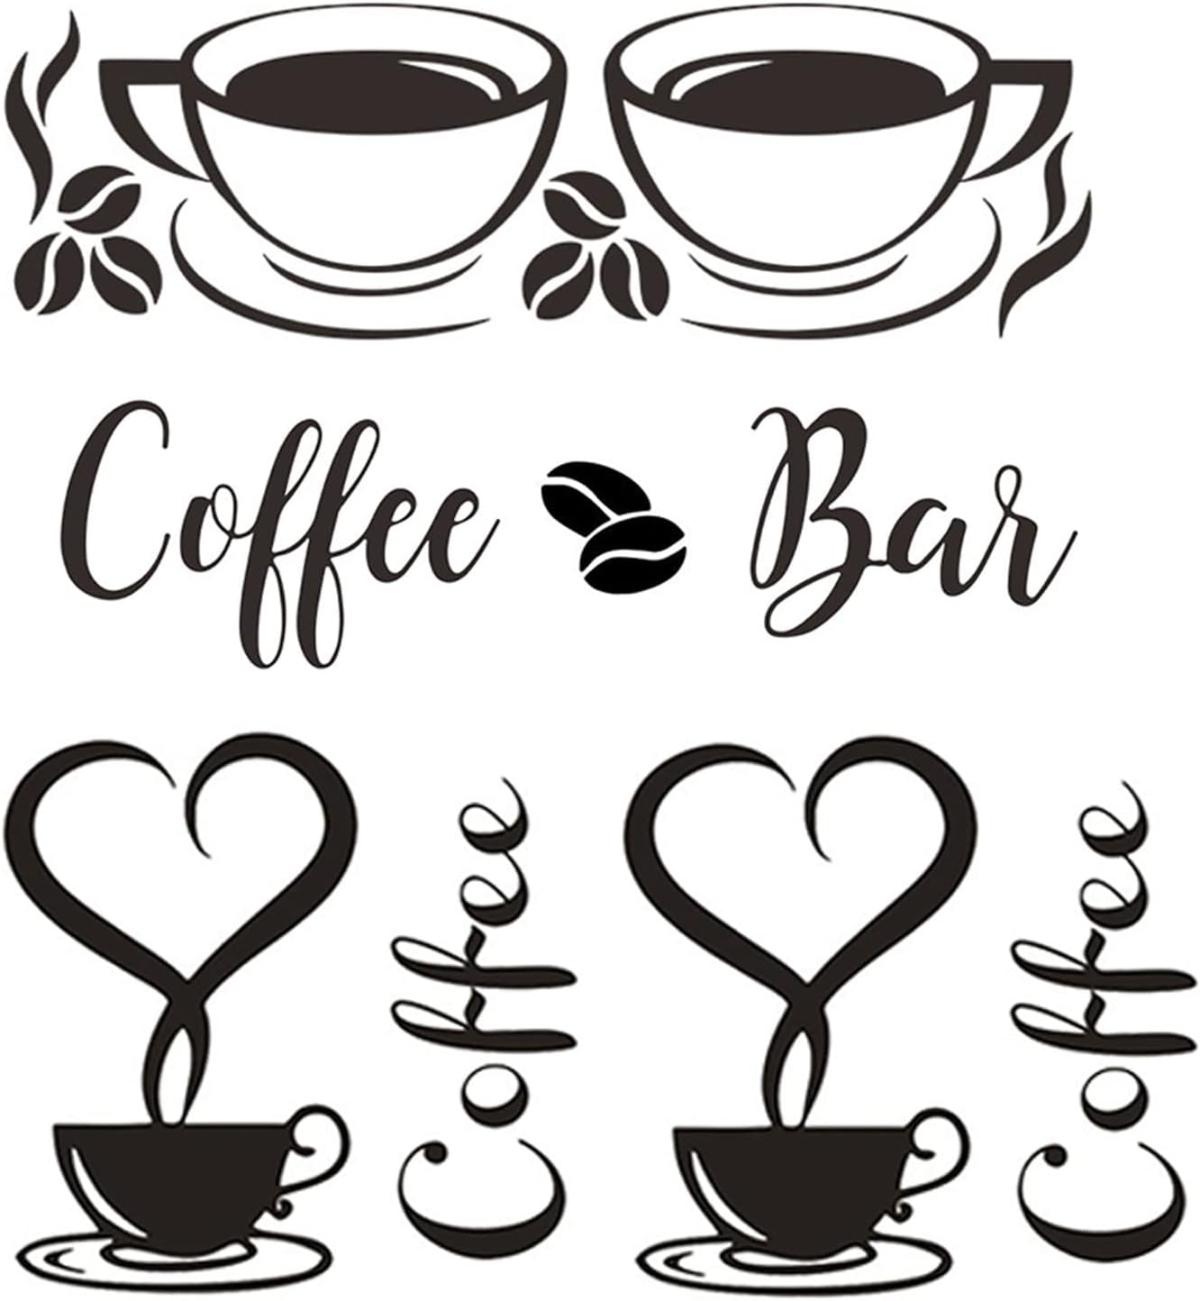 3-Piece Coffee Wall Decor Stickers for your DIY Coffee Sign